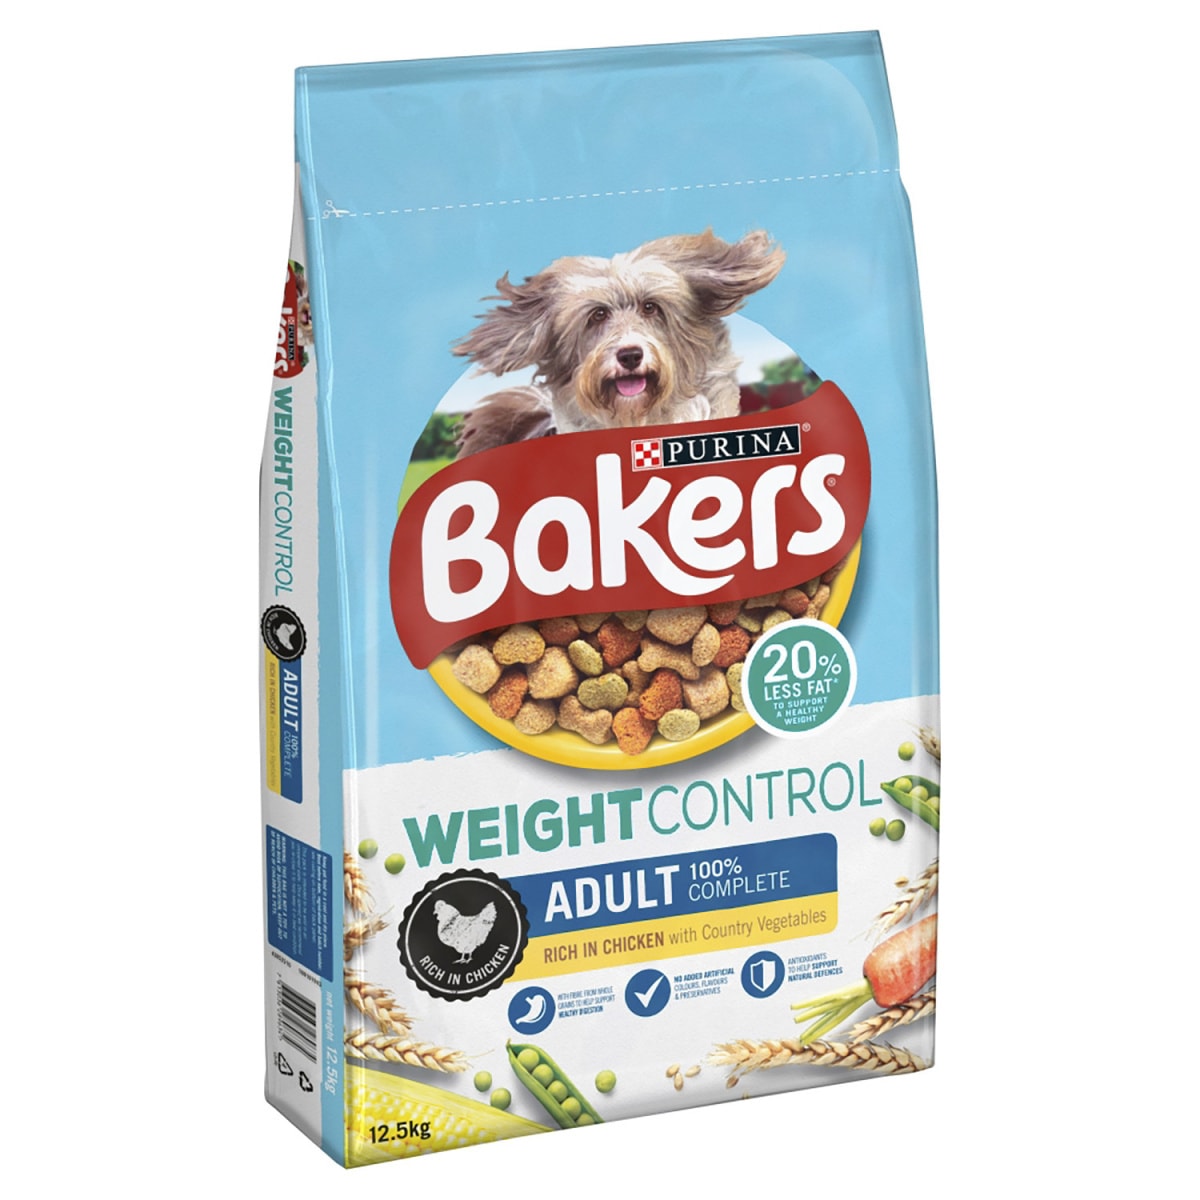 Bakers Complete Weight Control 12.5kg – Pawfect Supplies Ltd Product Image